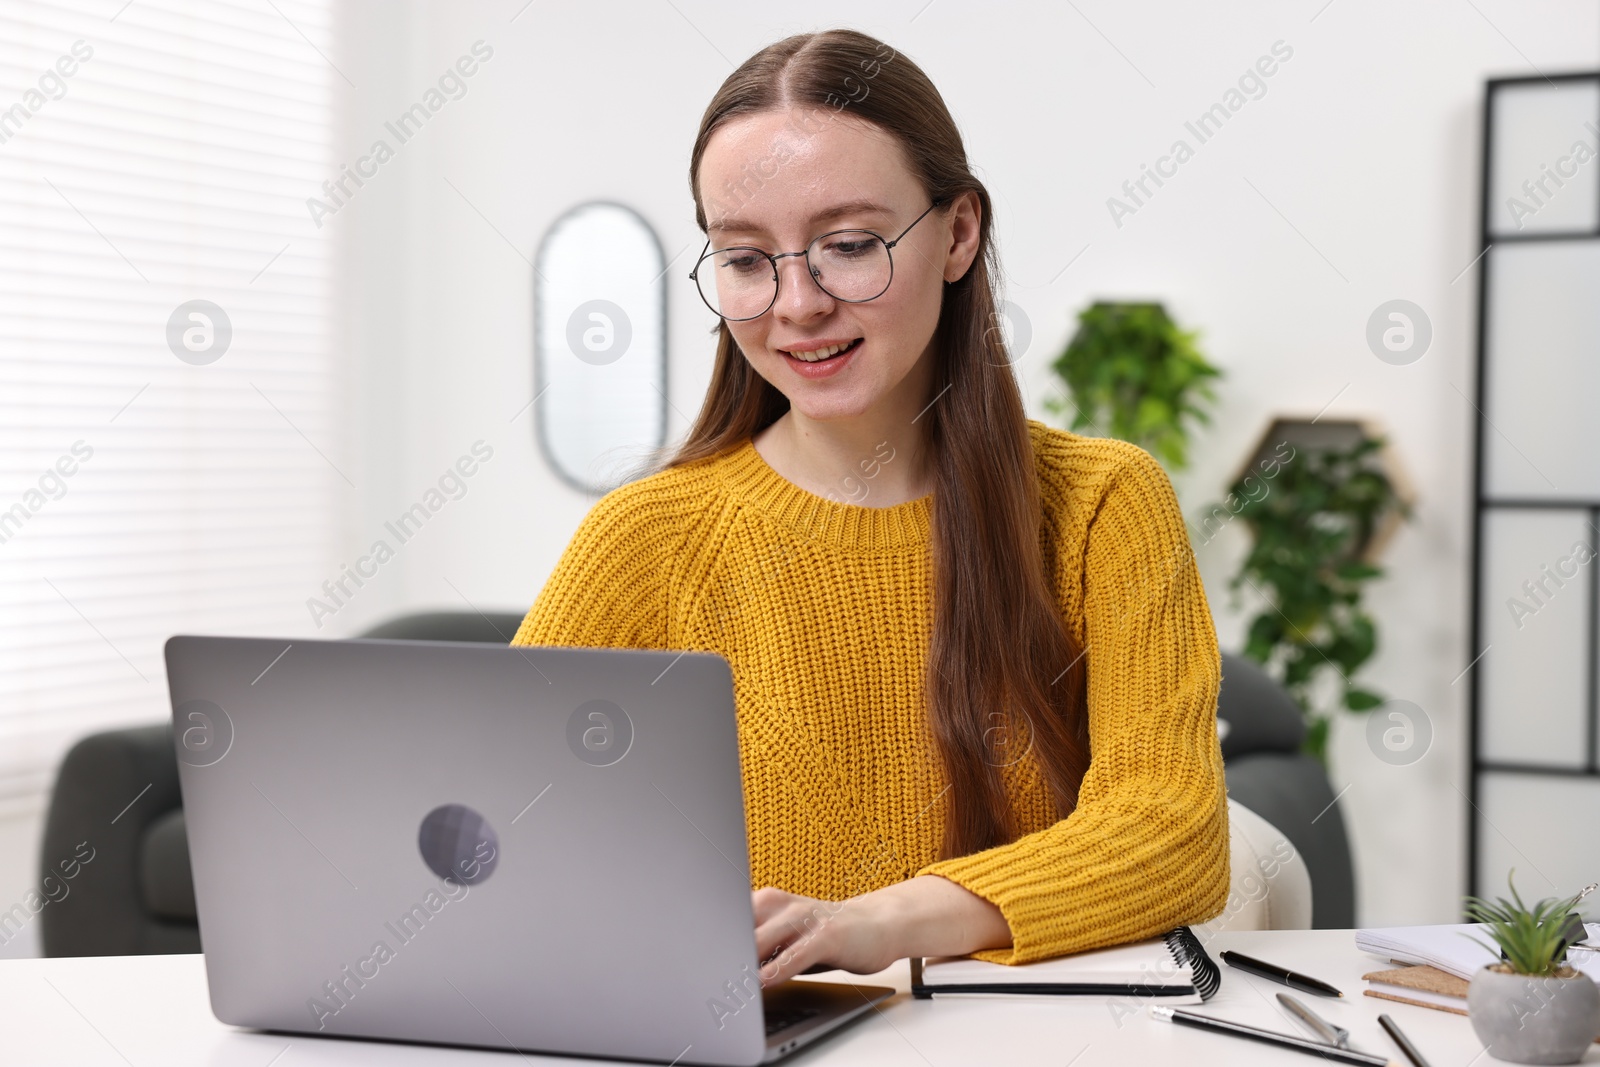 Photo of E-learning. Young woman using laptop during online lesson at white table indoors